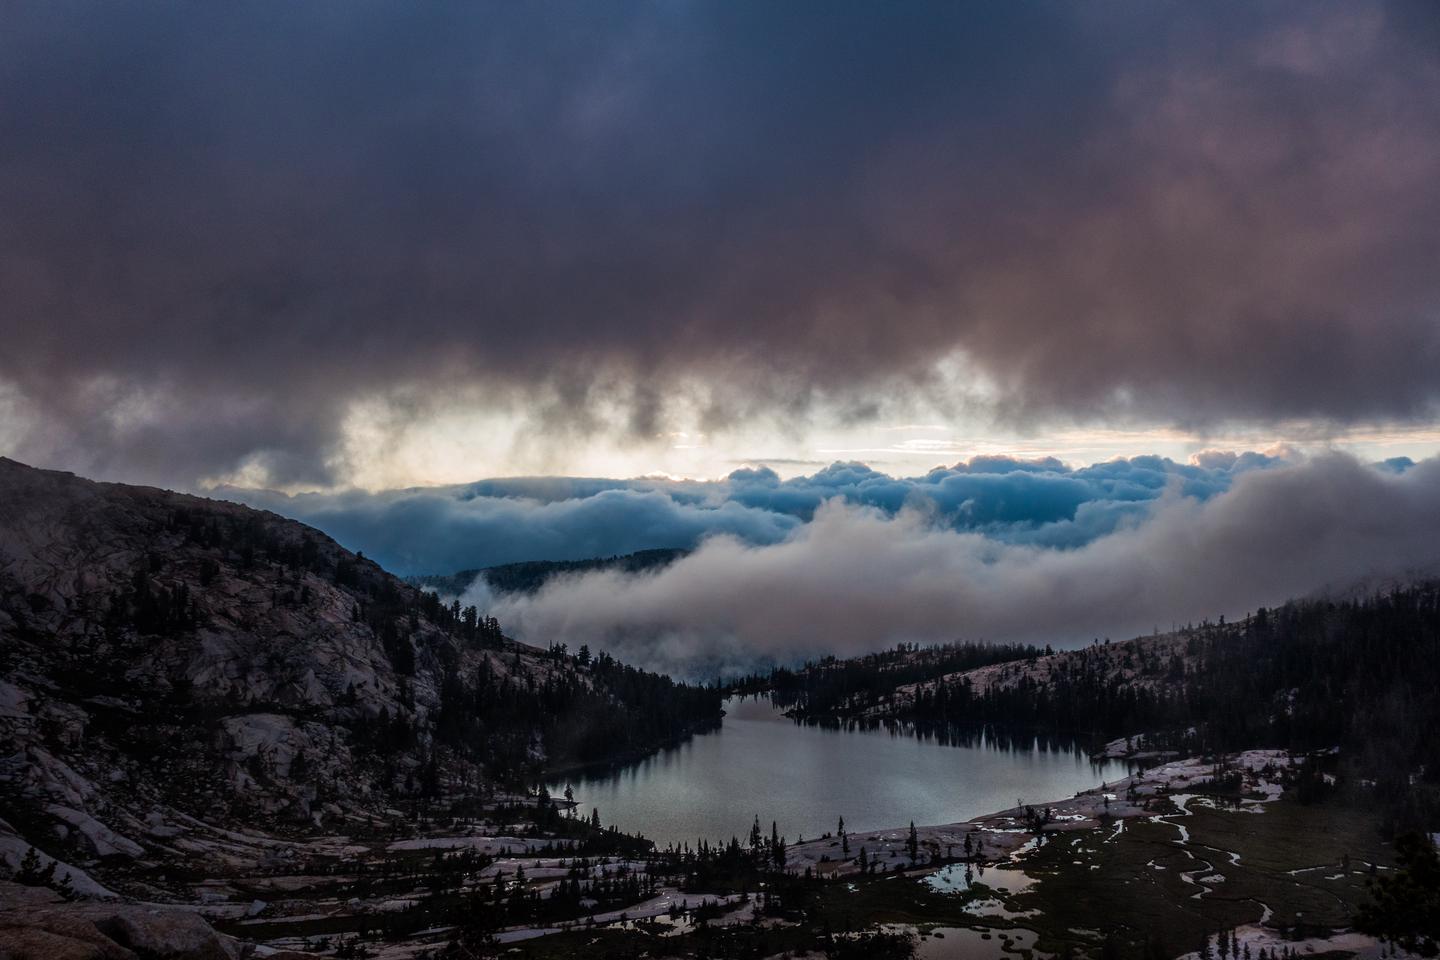 View of a lake below in, with clouds above and clouds below the lake in the distanceA glacial lake sits high in the Sierra, nestled in the heart of a breaking storm. 